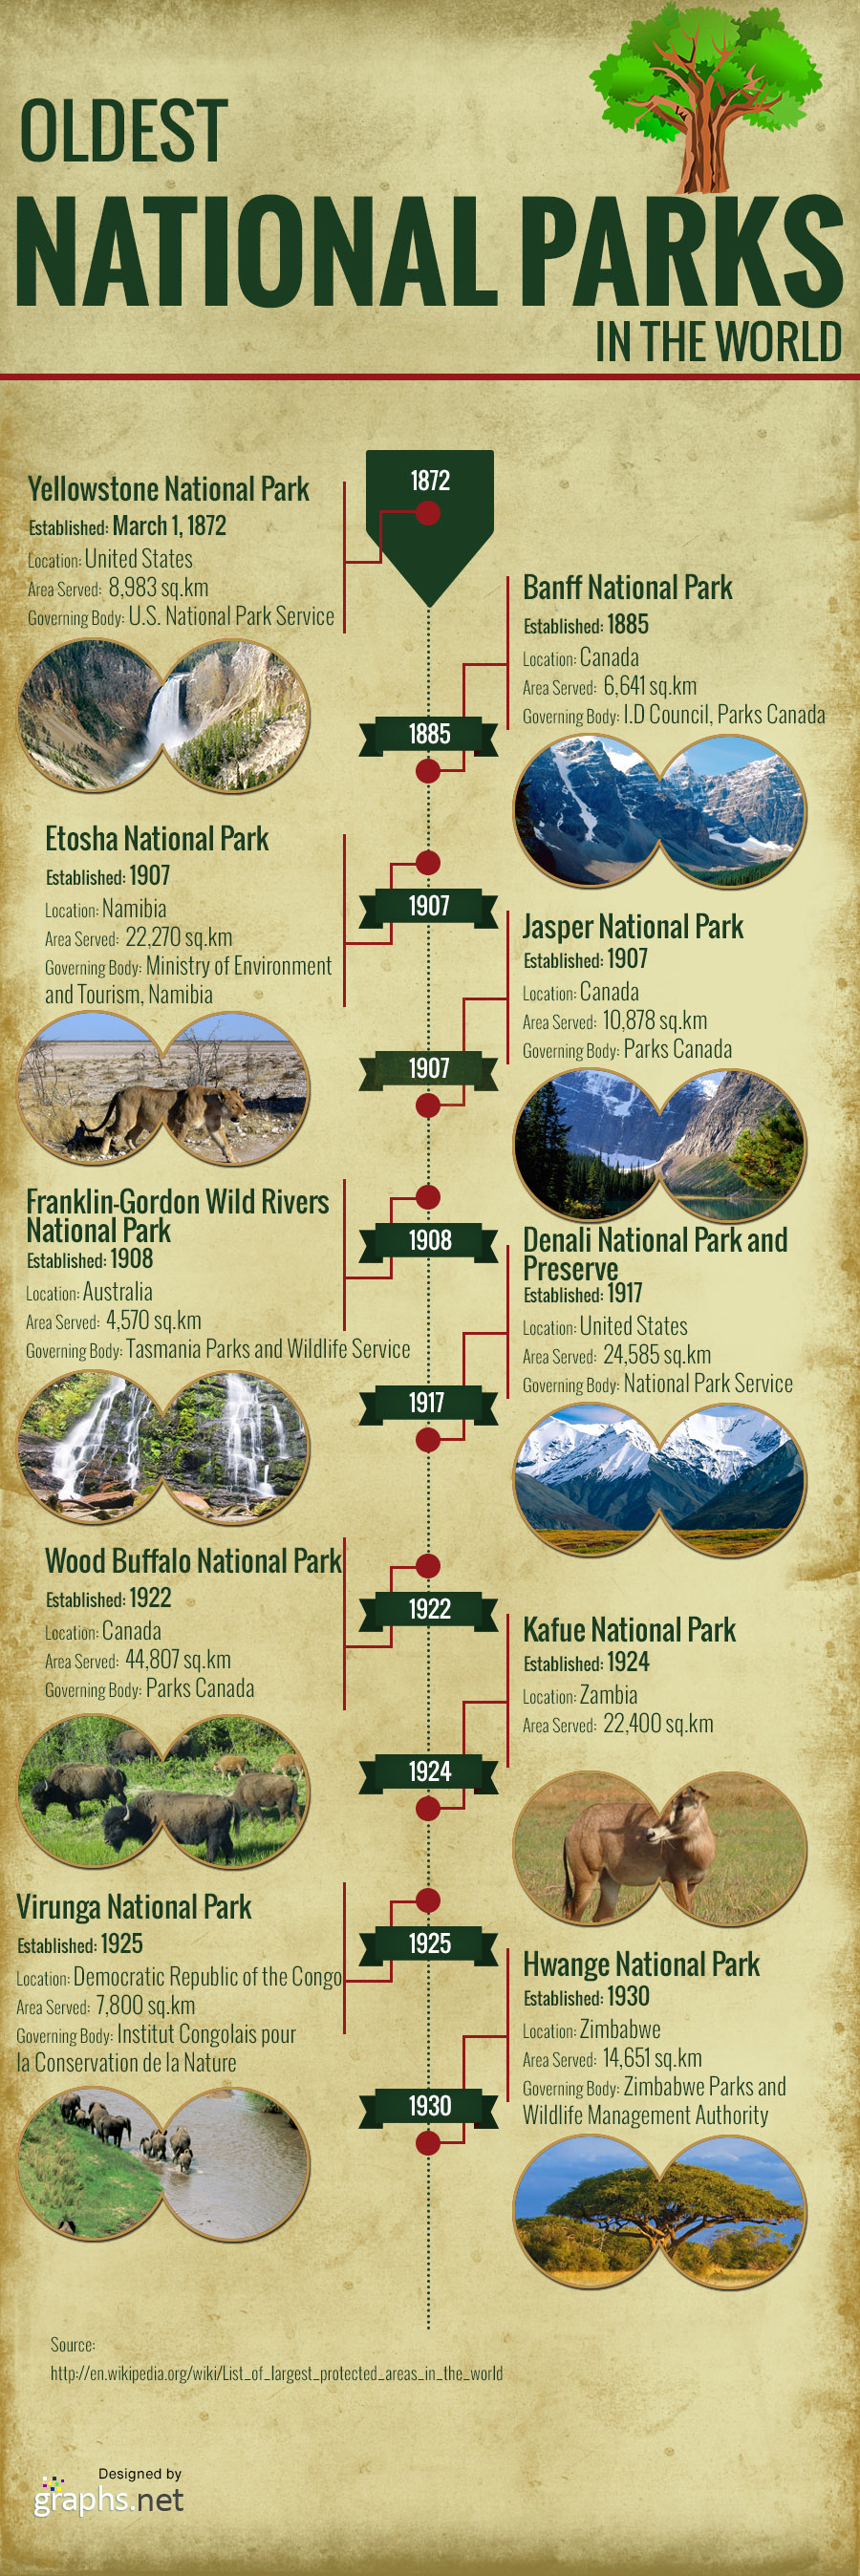 Oldest National Parks in the World